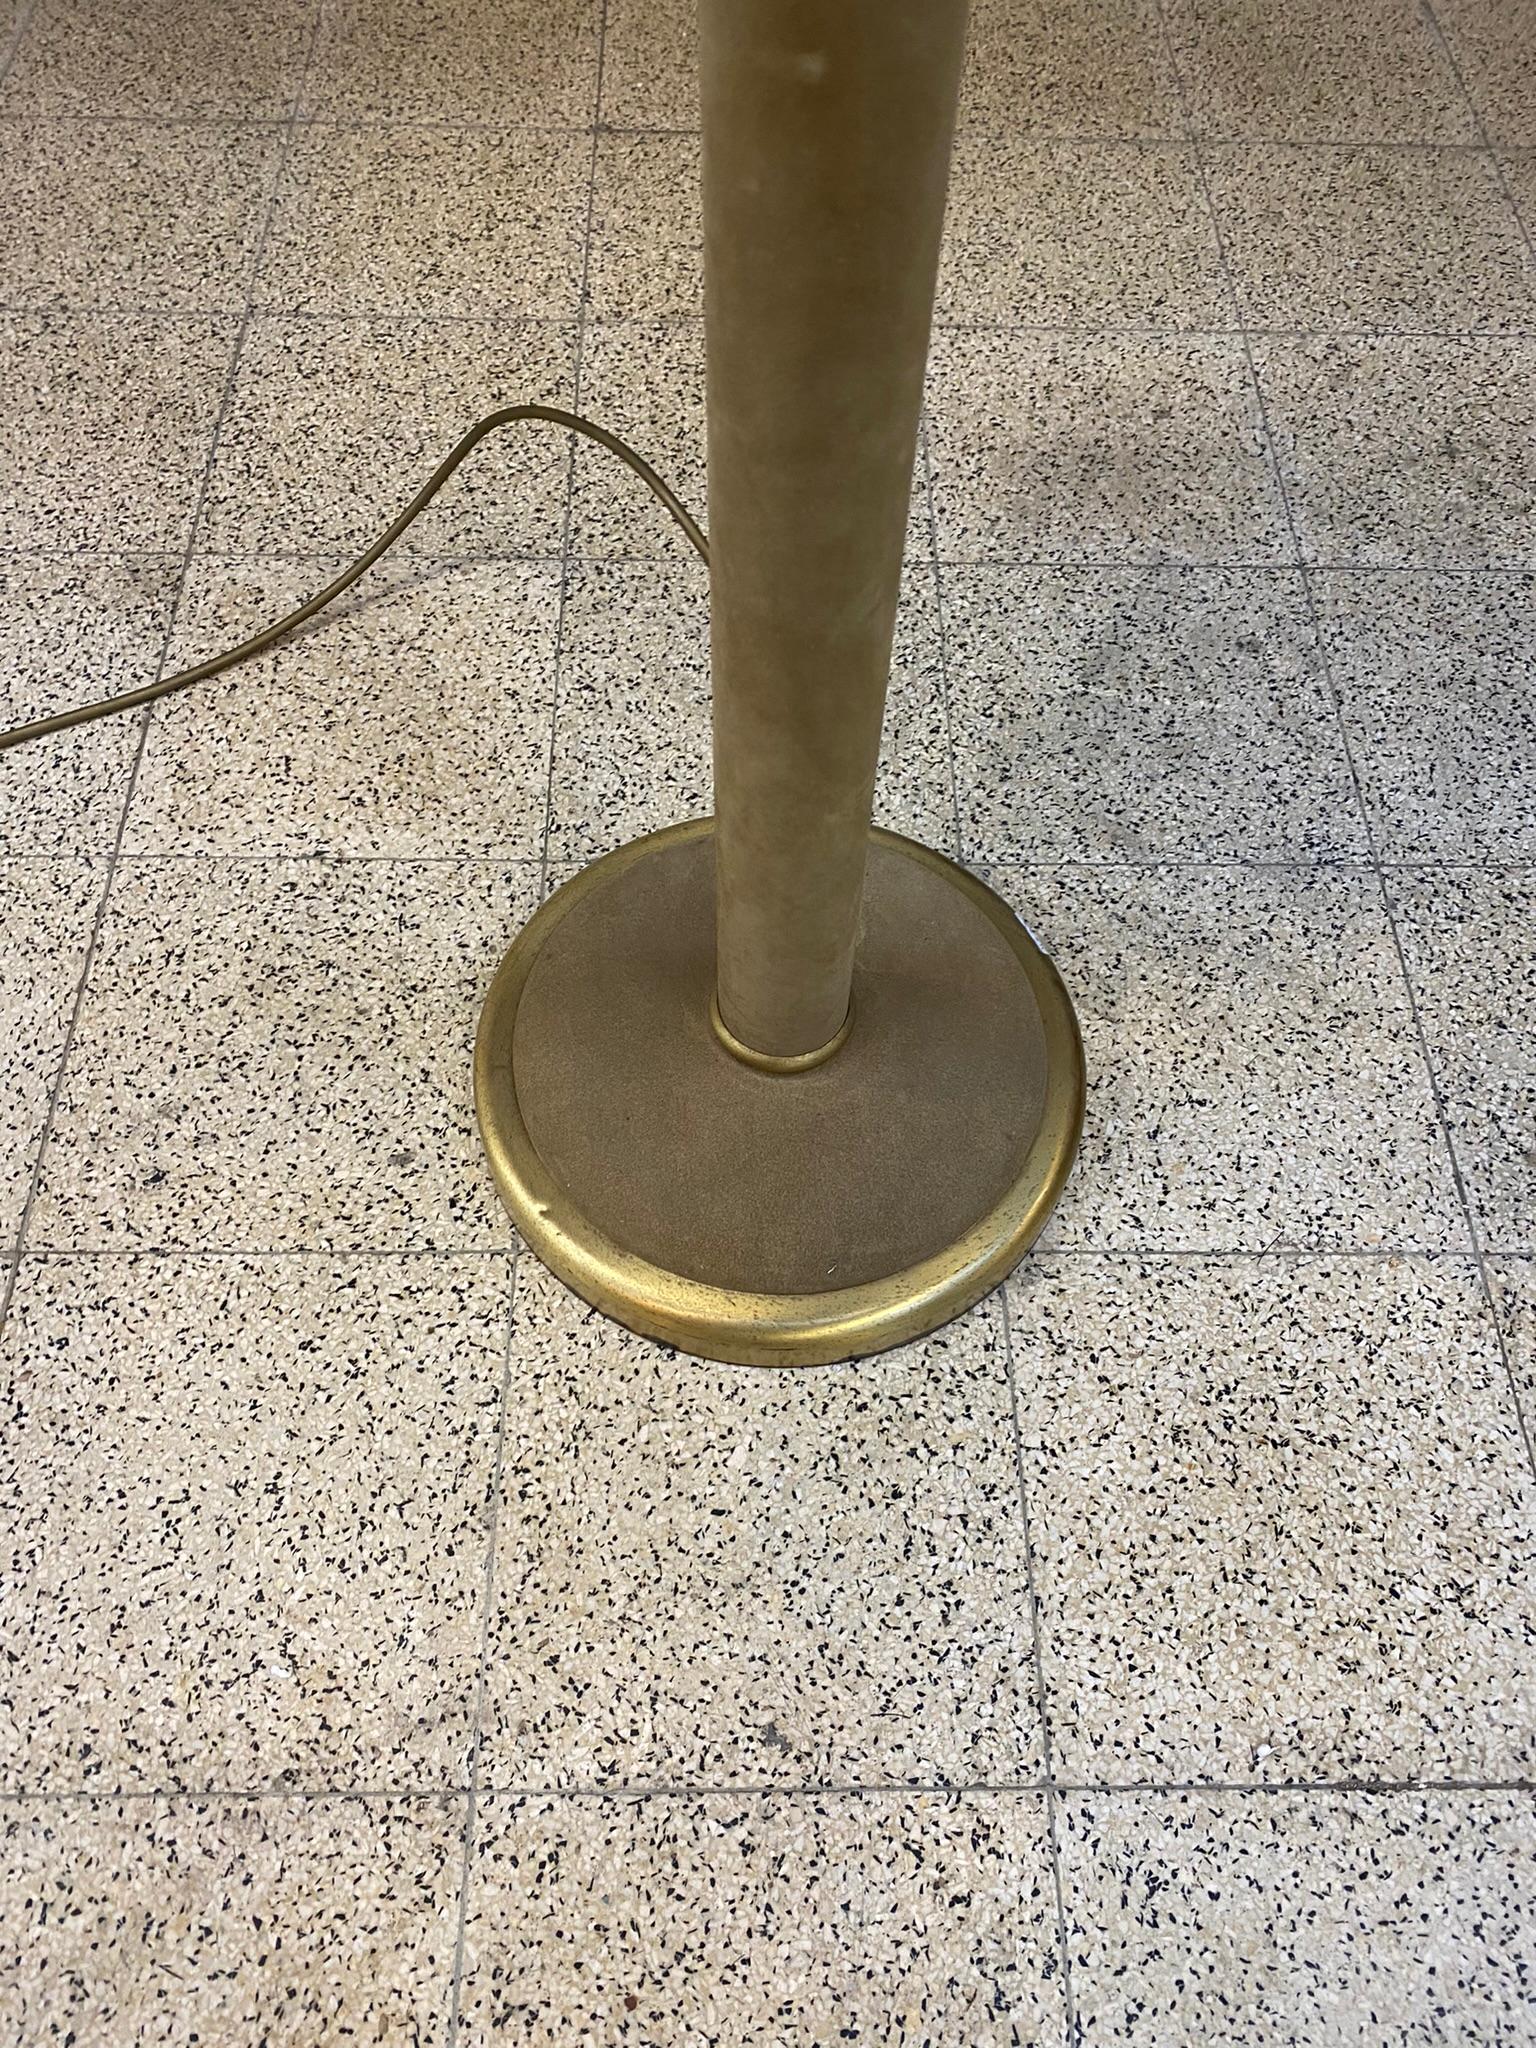 Elegant Floor Lamp in Suede Leather in the Style of Jacques Adnet, circa 1960 For Sale 1